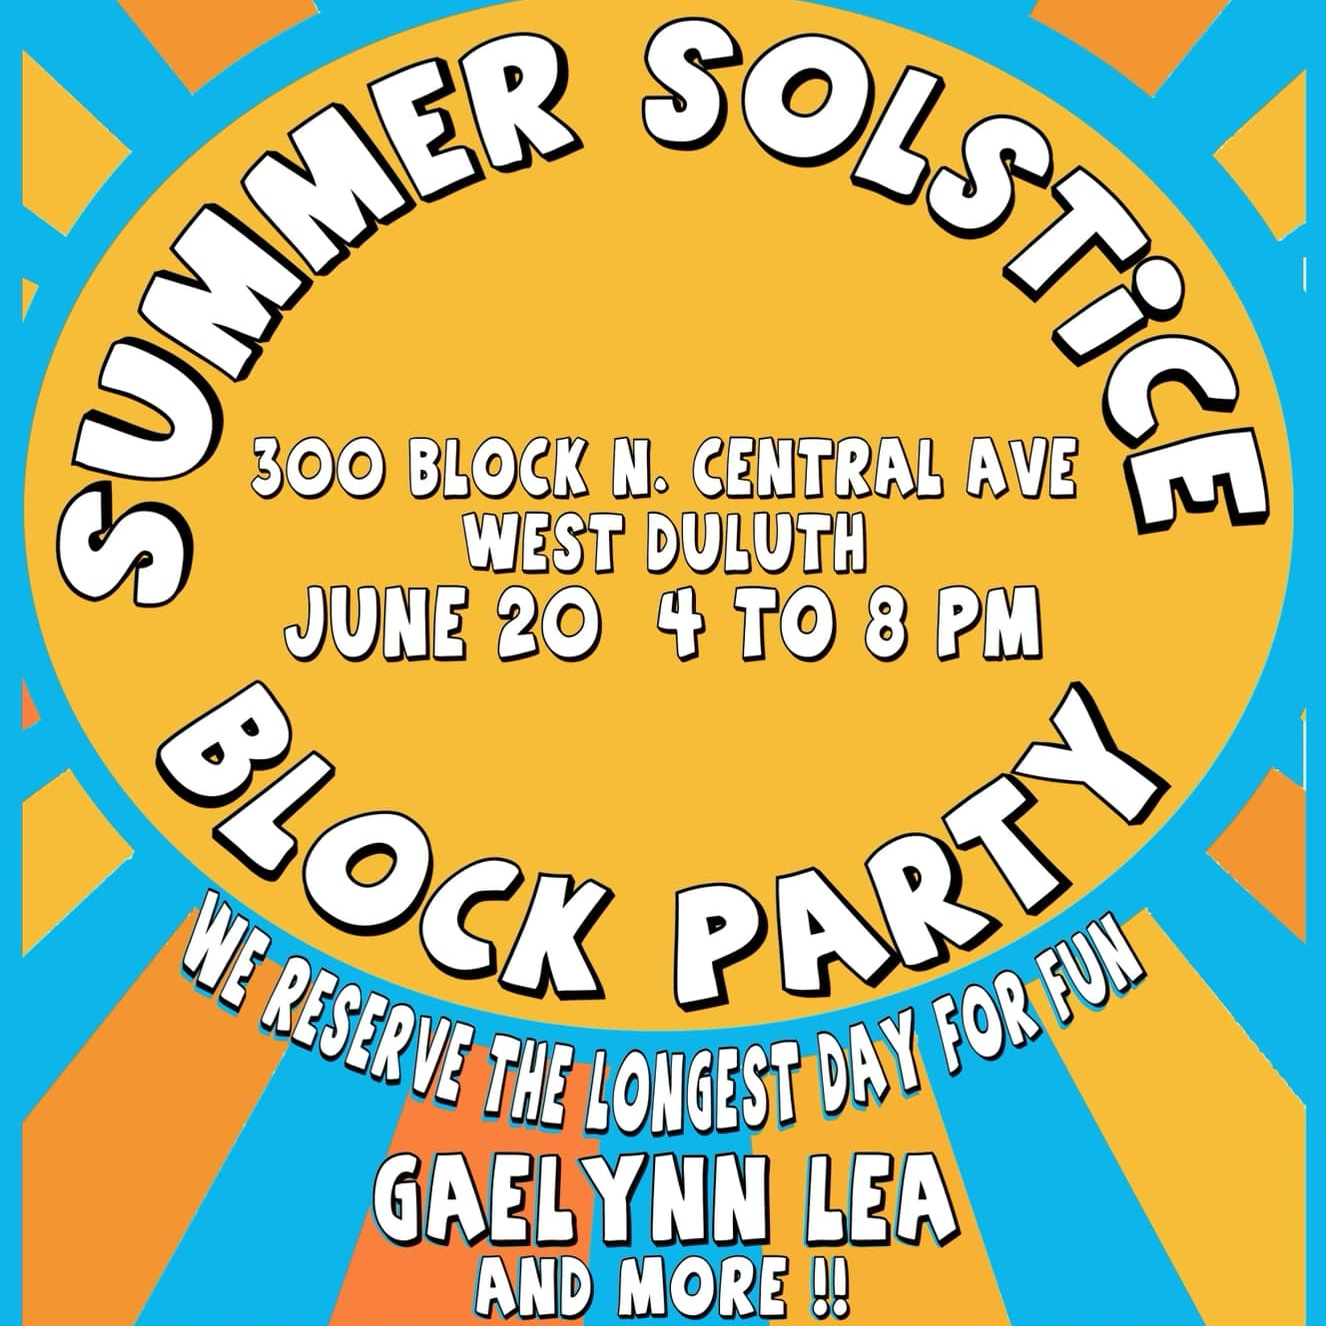  a graphic- with a background of blue and yellow shaped like a sun - within the sun’s circle are the words: Summer solstice block party – 300 Block N. Central Ave. West Duluth –June 20, 4 to 8 PM –We reserve the longest day for fun. Gaelynn Lea and more!!